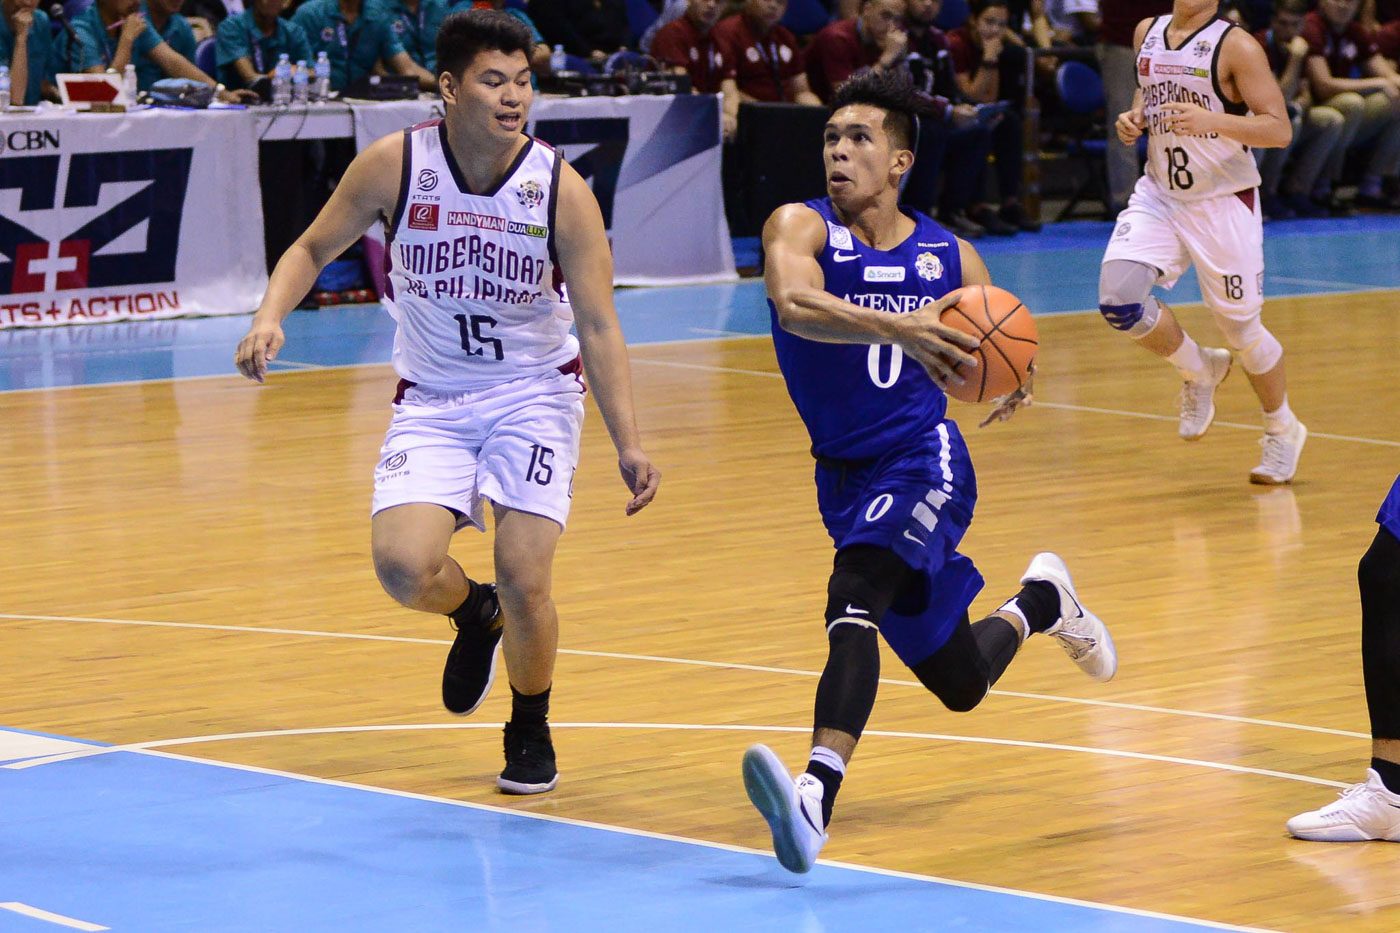 Ateneo soars over the Fighting Maroons in the battle of Katipunan